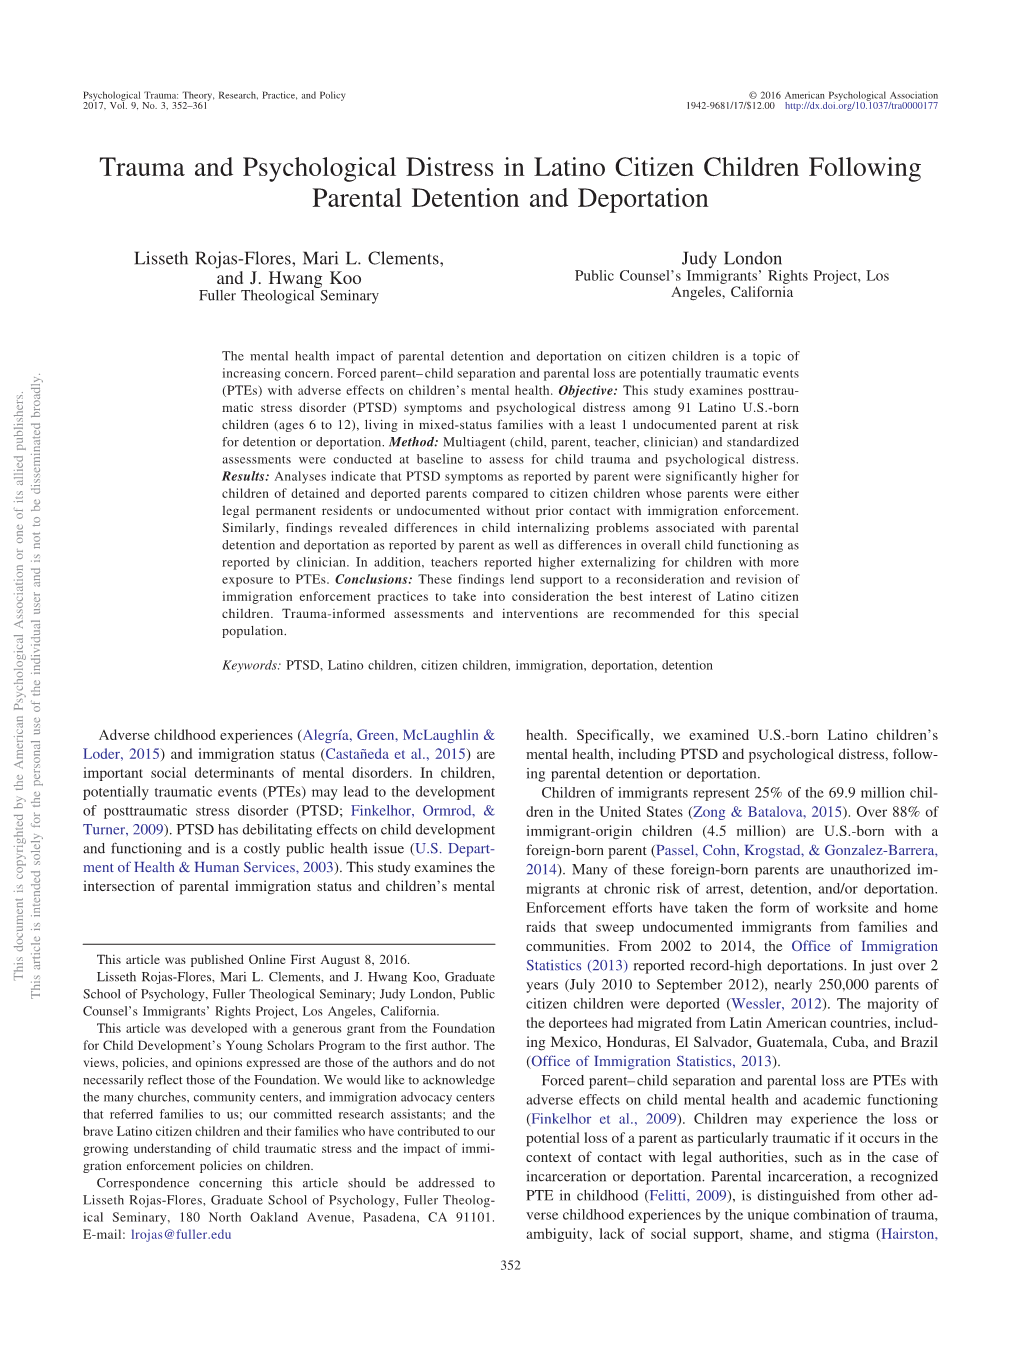 Trauma and Psychological Distress in Latino Citizen Children Following Parental Detention and Deportation